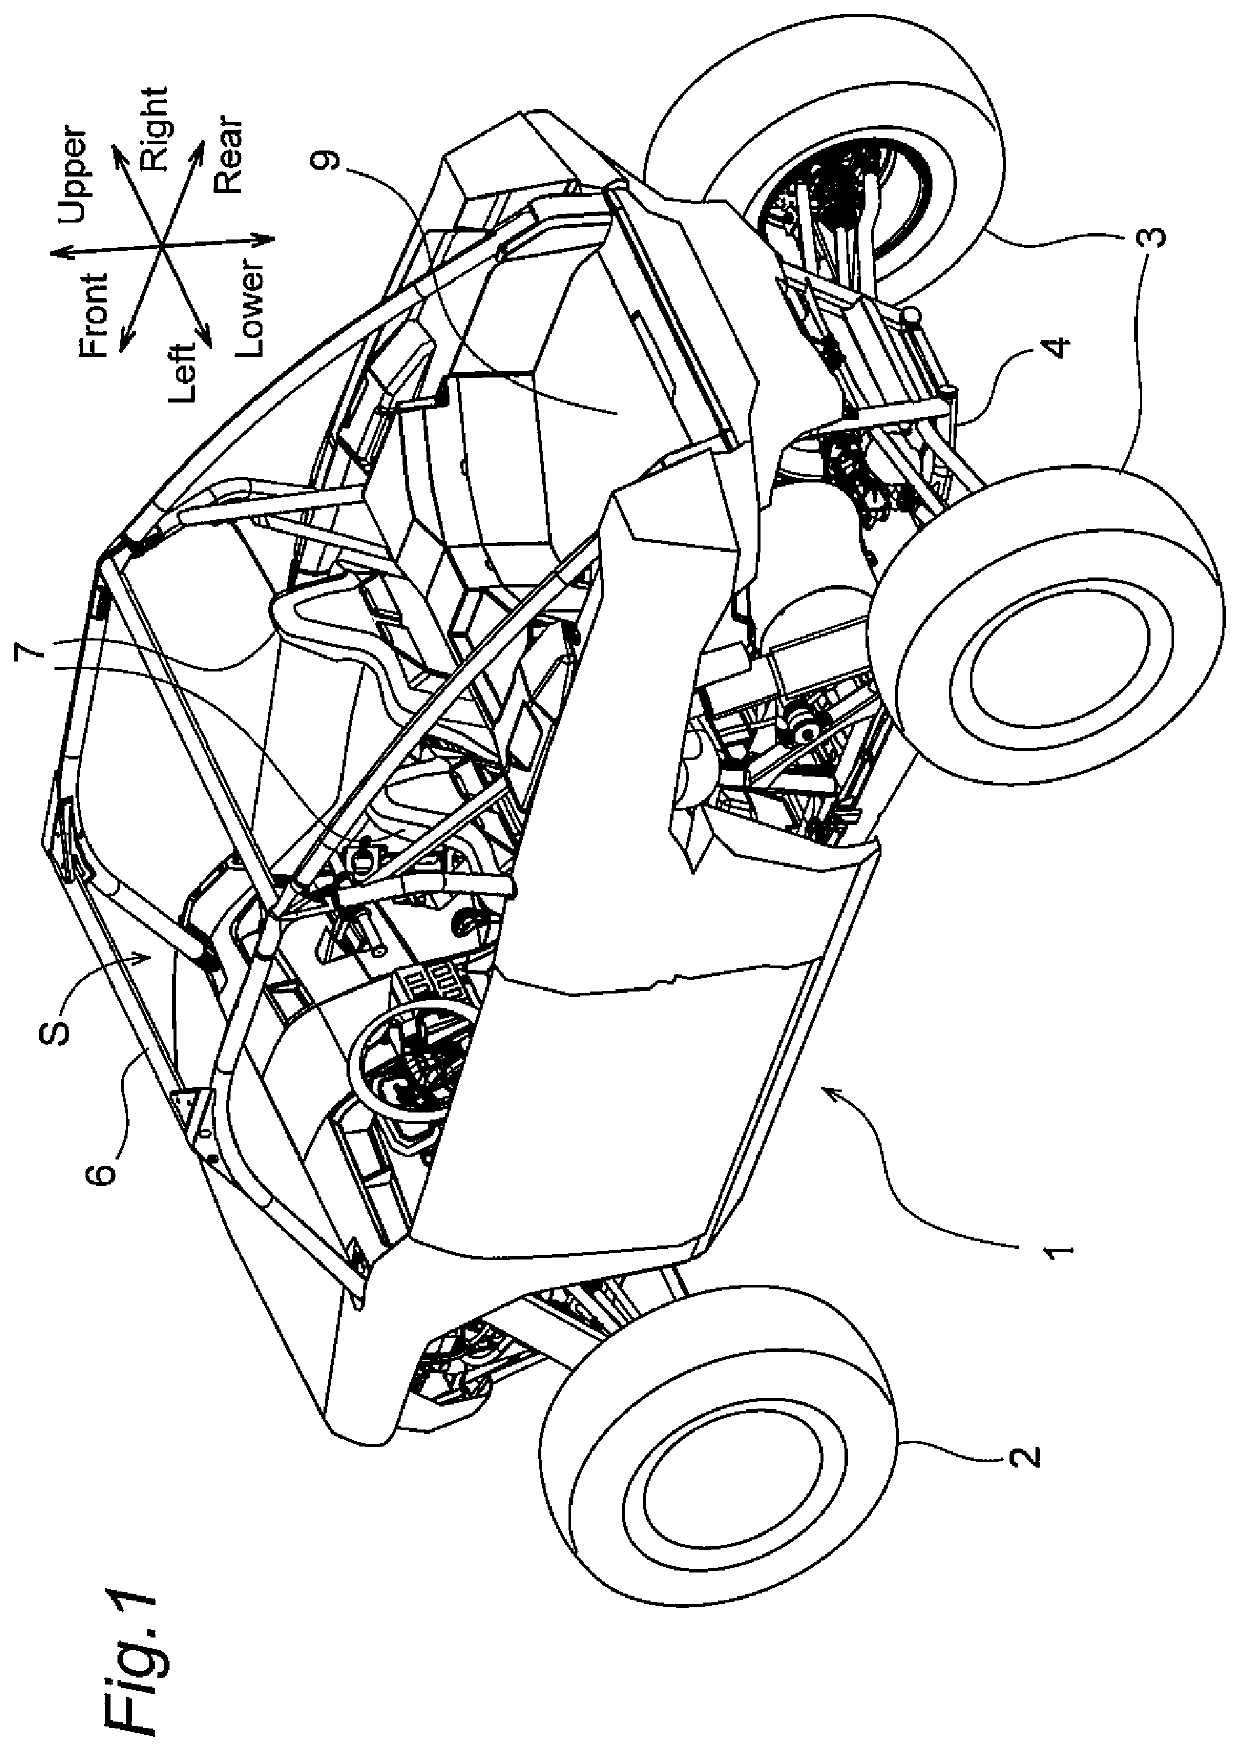 Seat moving structure for utility vehicle